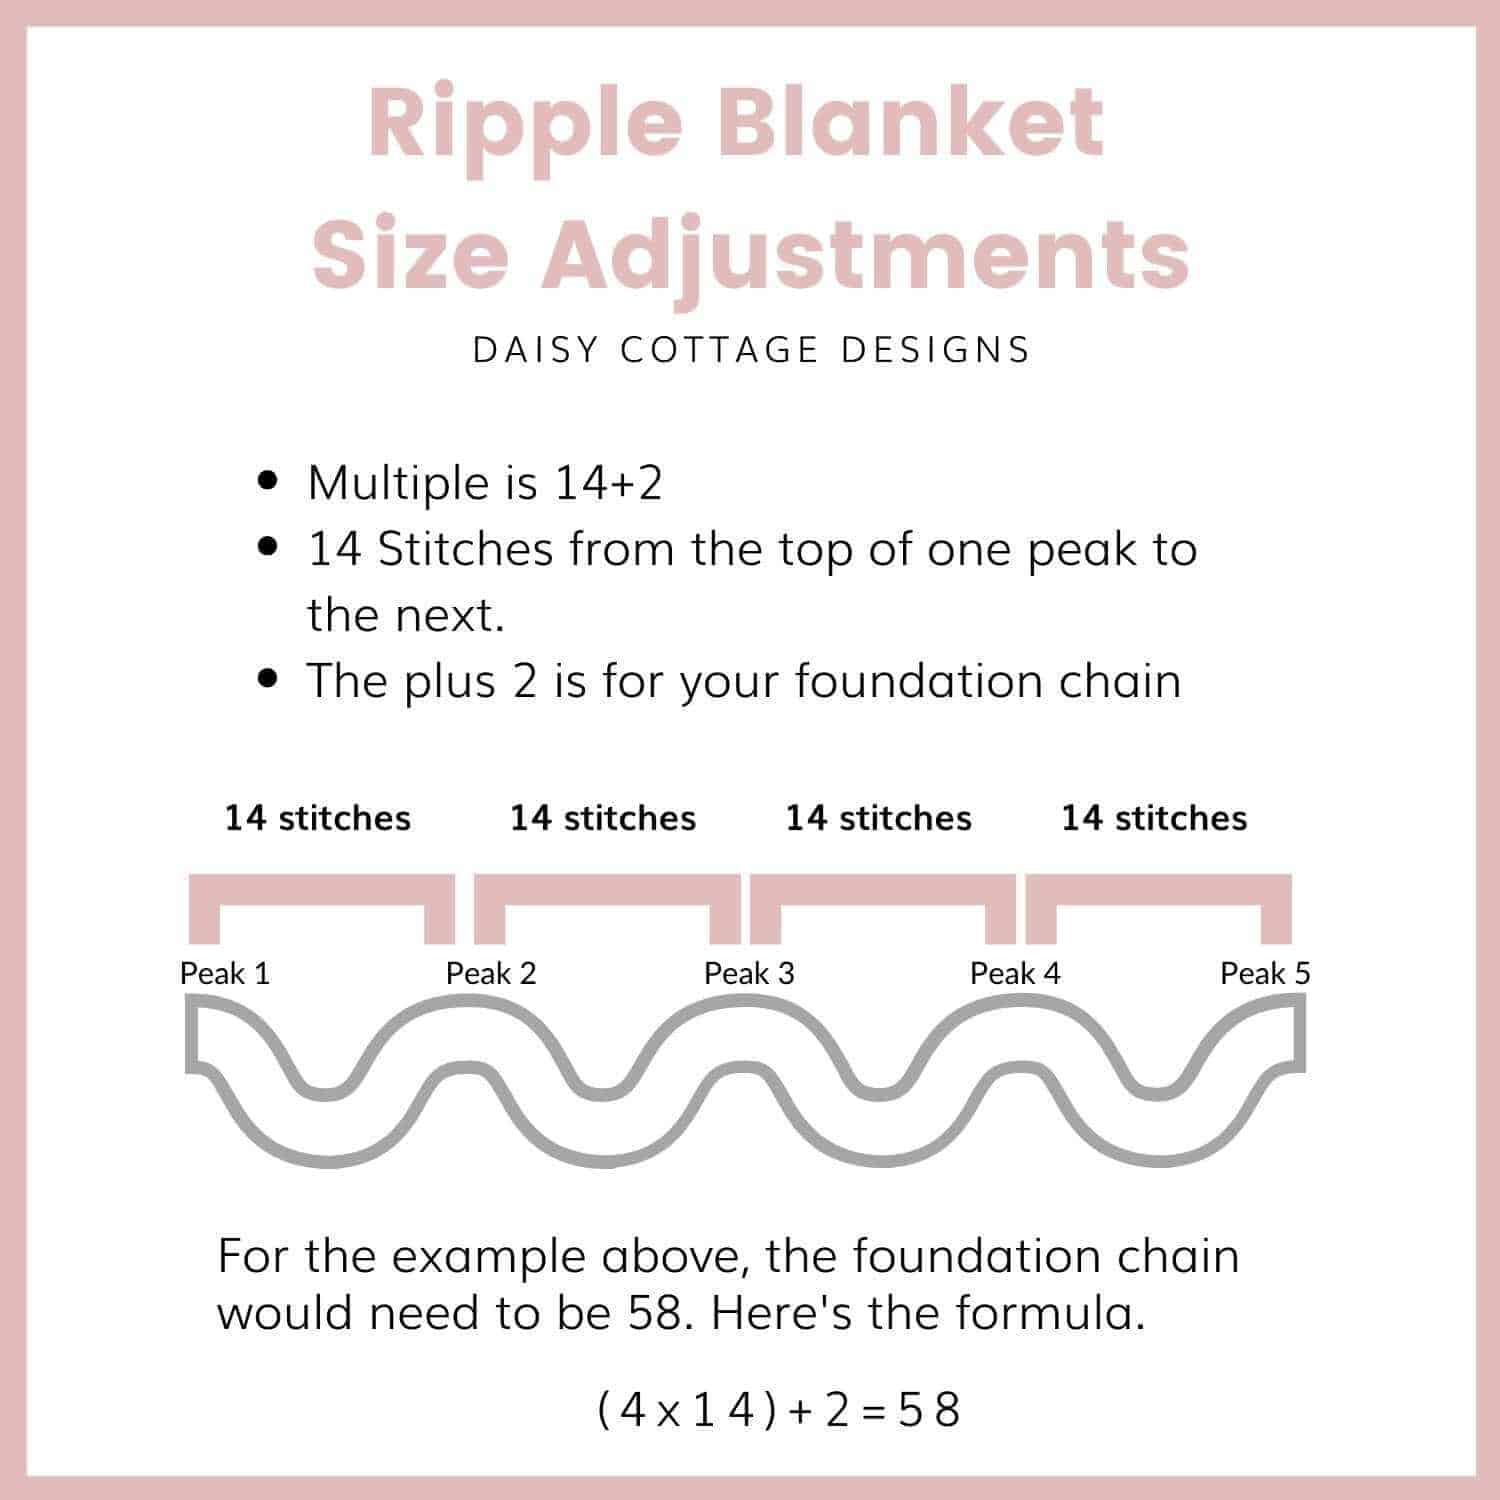 How to Adjust the Size of a Ripple Blanket pattern chart